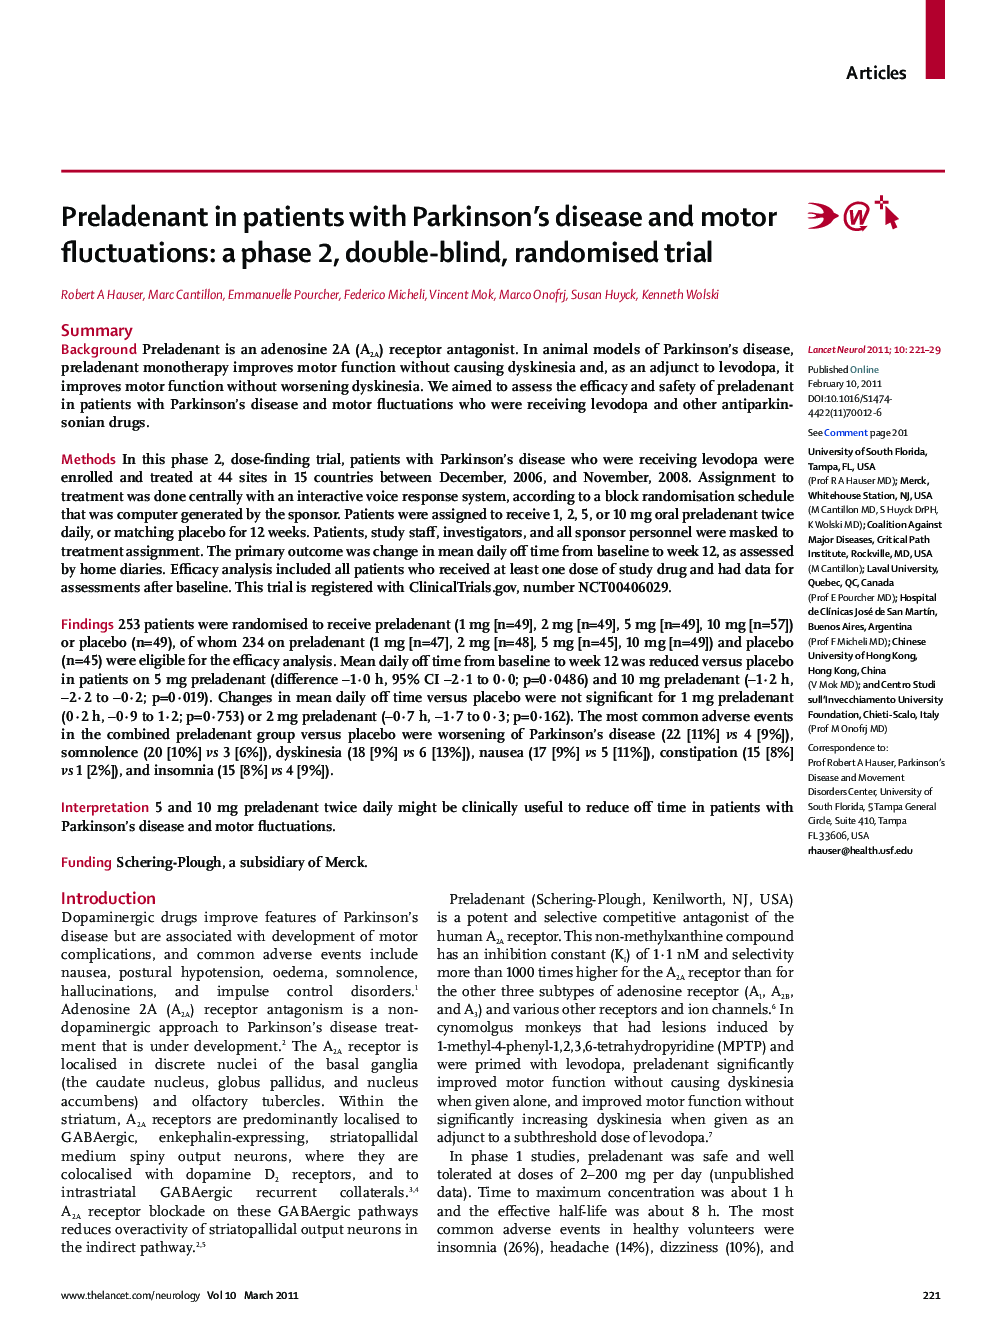 Preladenant in patients with Parkinson's disease and motor fluctuations: a phase 2, double-blind, randomised trial